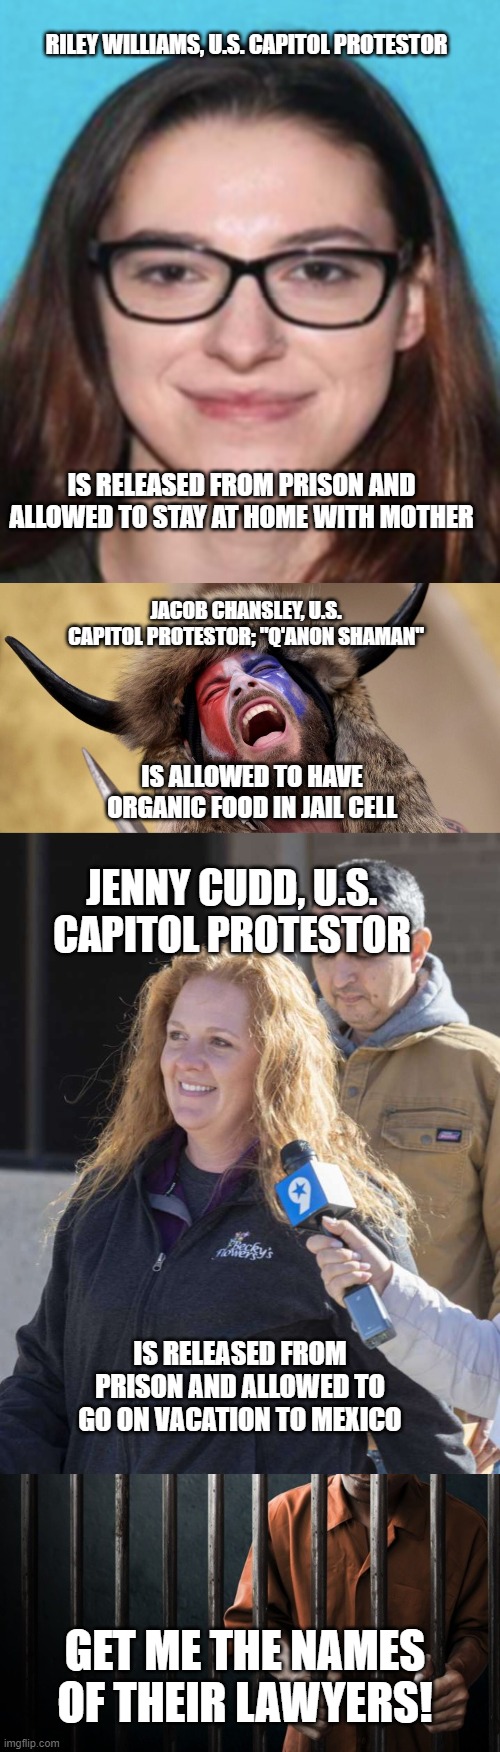 Must be nice! | RILEY WILLIAMS, U.S. CAPITOL PROTESTOR; IS RELEASED FROM PRISON AND ALLOWED TO STAY AT HOME WITH MOTHER; JACOB CHANSLEY, U.S. CAPITOL PROTESTOR; "Q'ANON SHAMAN"; IS ALLOWED TO HAVE ORGANIC FOOD IN JAIL CELL; JENNY CUDD, U.S. CAPITOL PROTESTOR; IS RELEASED FROM PRISON AND ALLOWED TO GO ON VACATION TO MEXICO; GET ME THE NAMES OF THEIR LAWYERS! | image tagged in white privilege | made w/ Imgflip meme maker